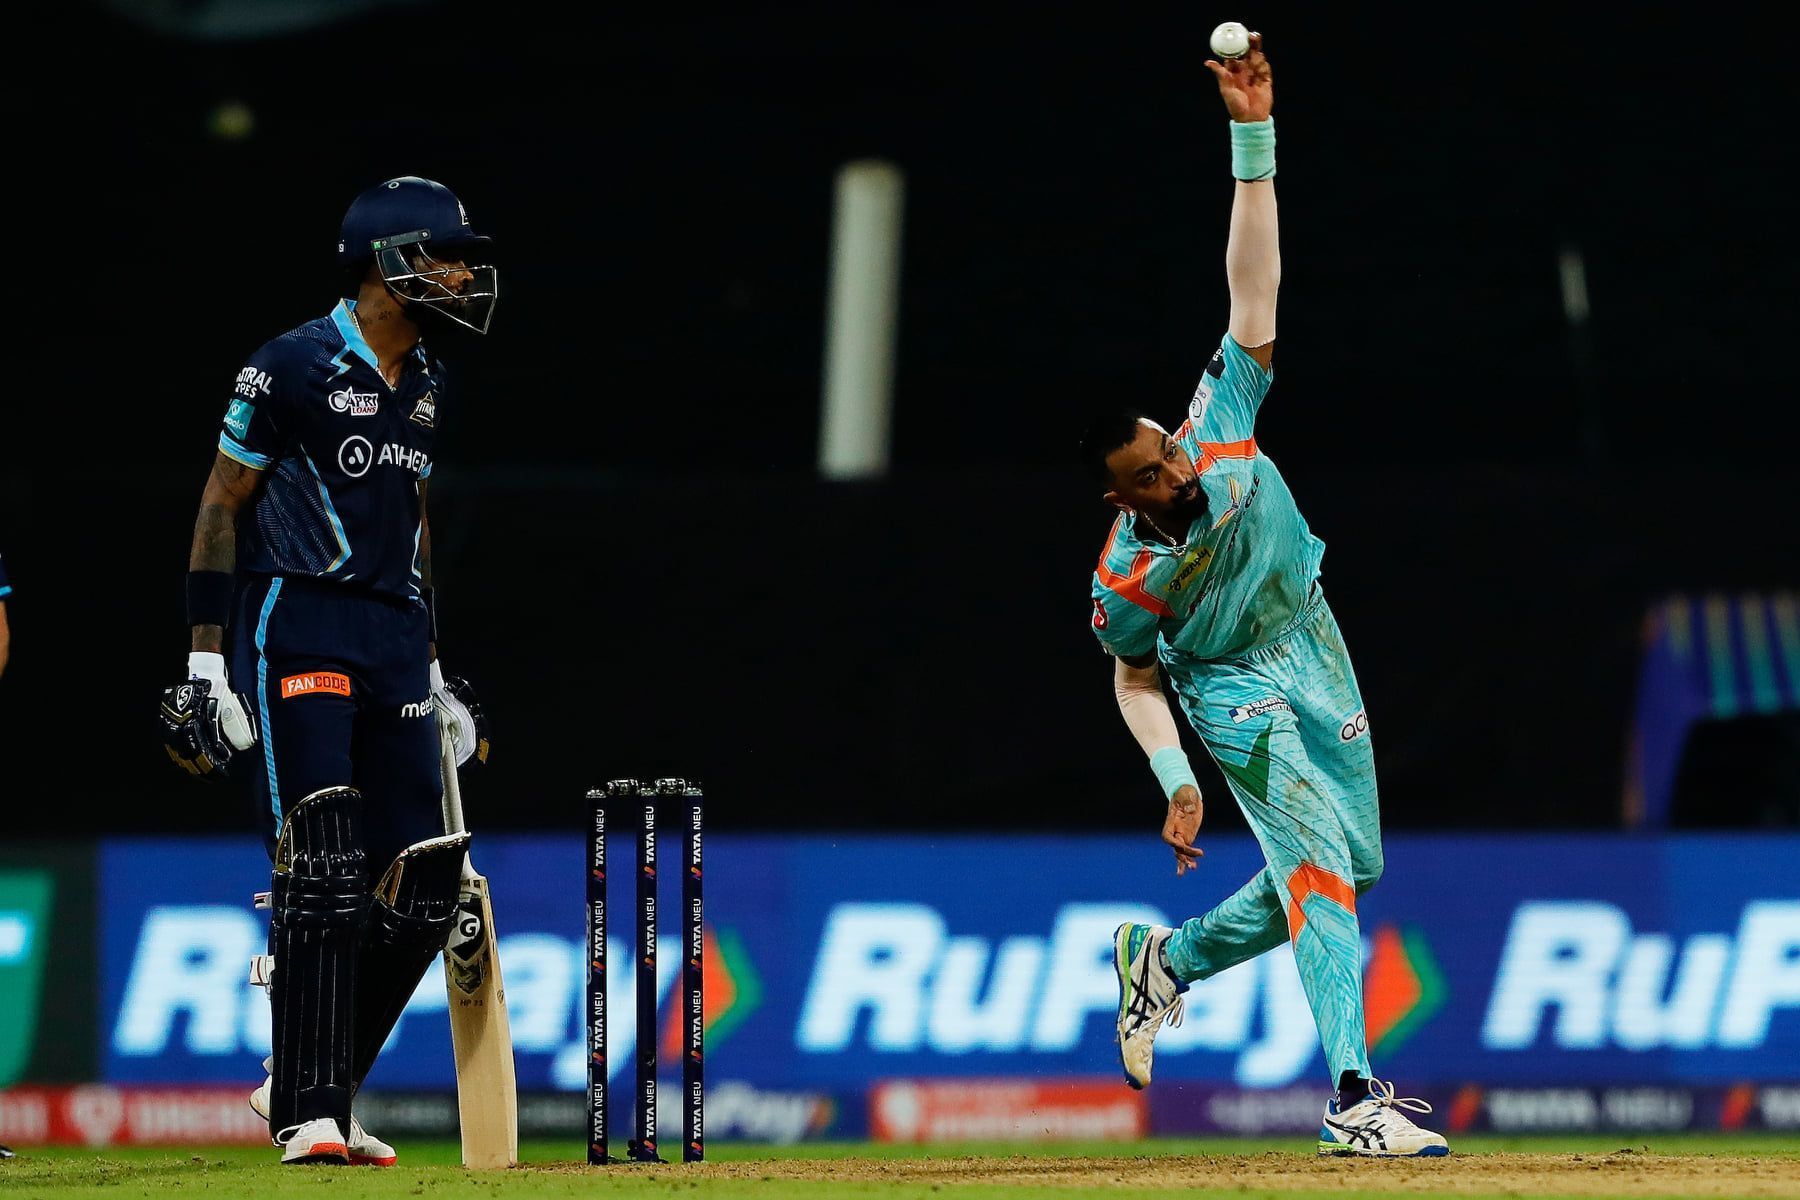 Fans witnessed a battle between Krunal and Hardik Pandya for the first time ever in the IPL (Image Courtesy: Gujarat Titans/Facebook)